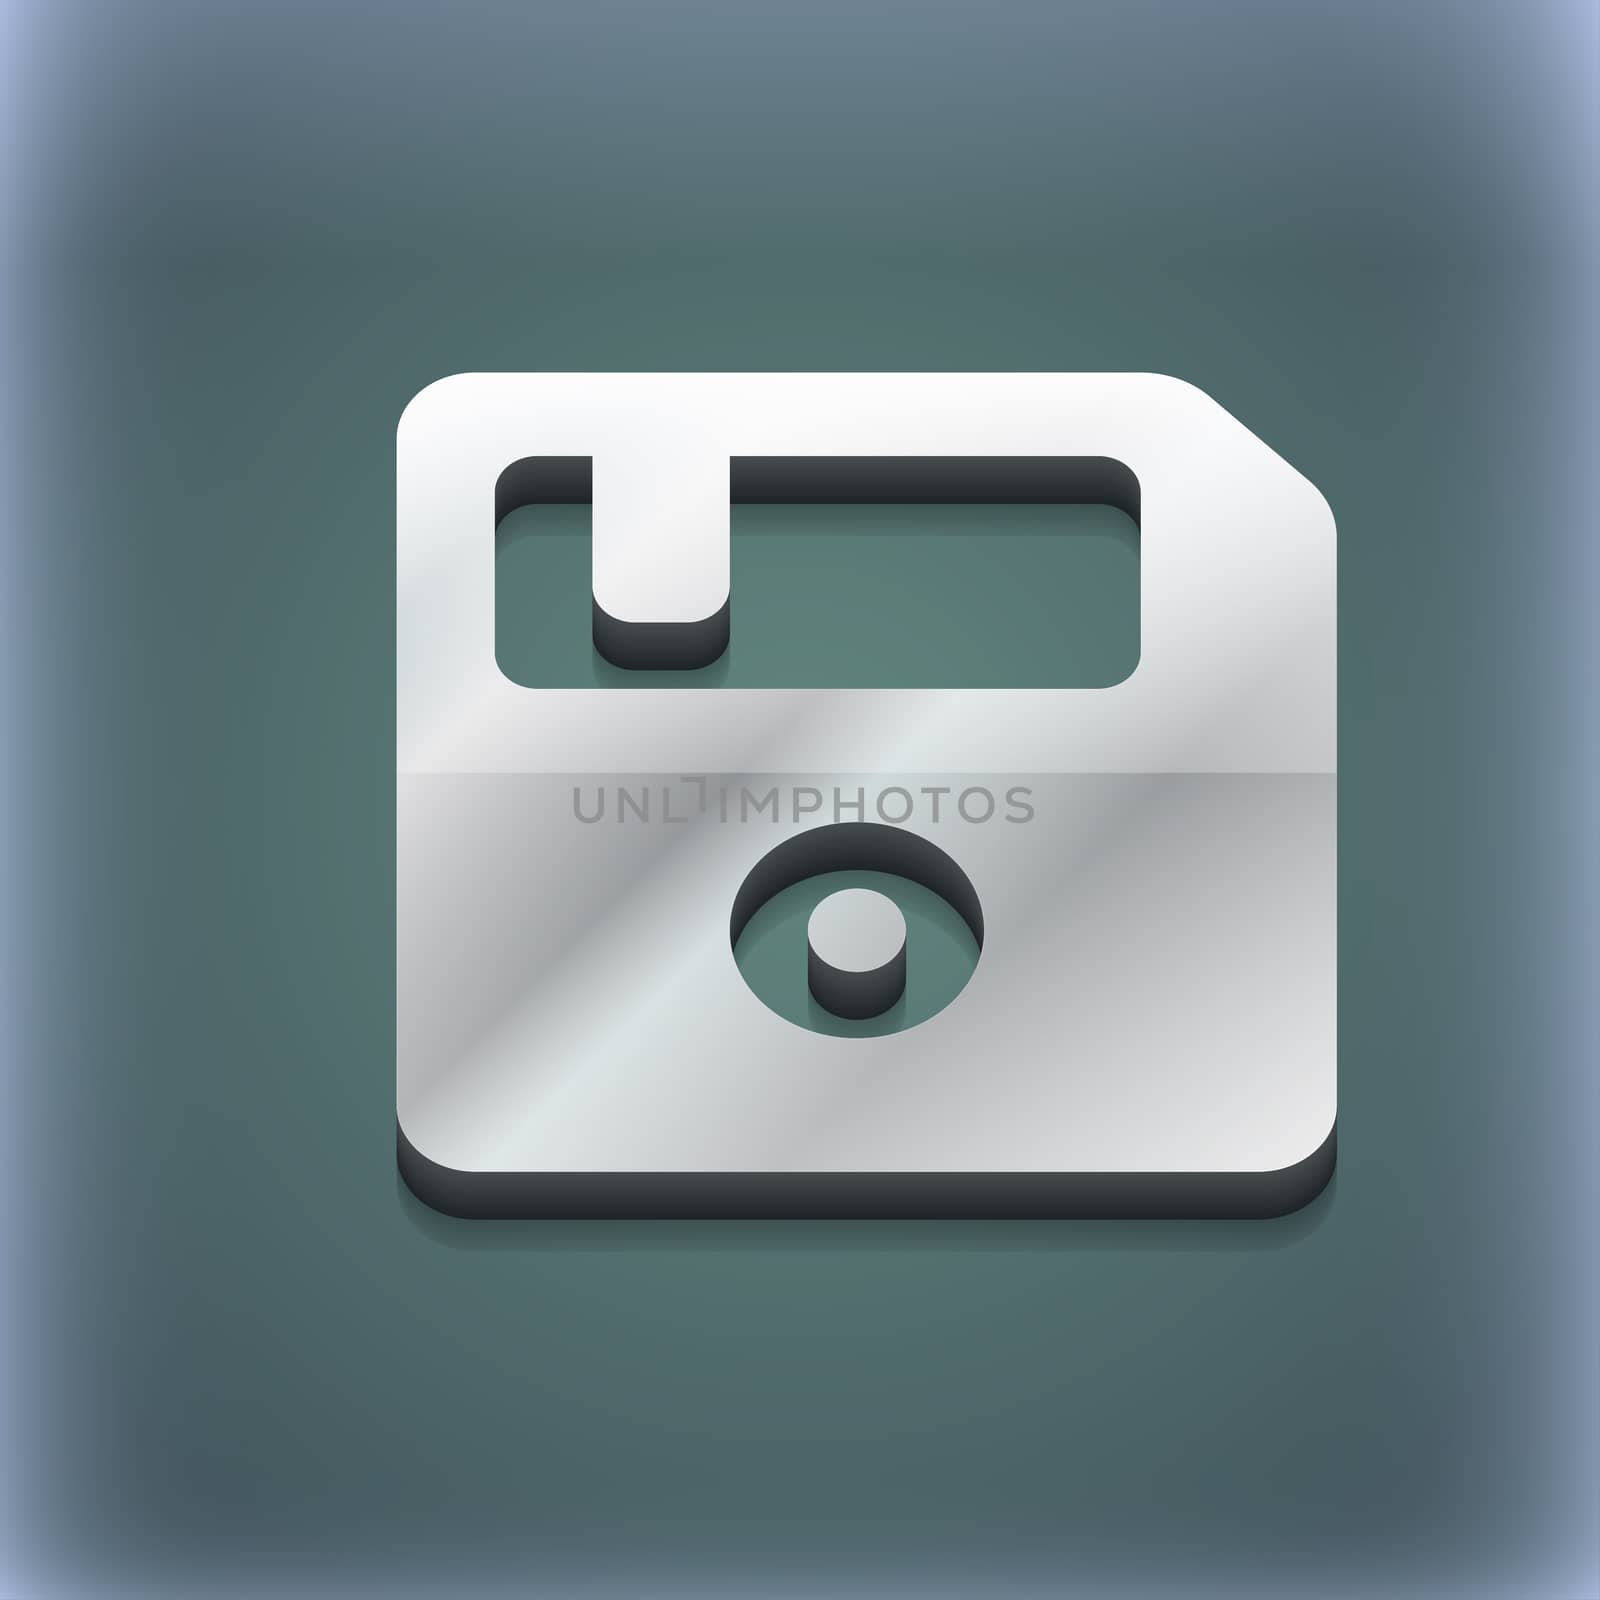 floppy icon symbol. 3D style. Trendy, modern design with space for your text illustration. Raster version